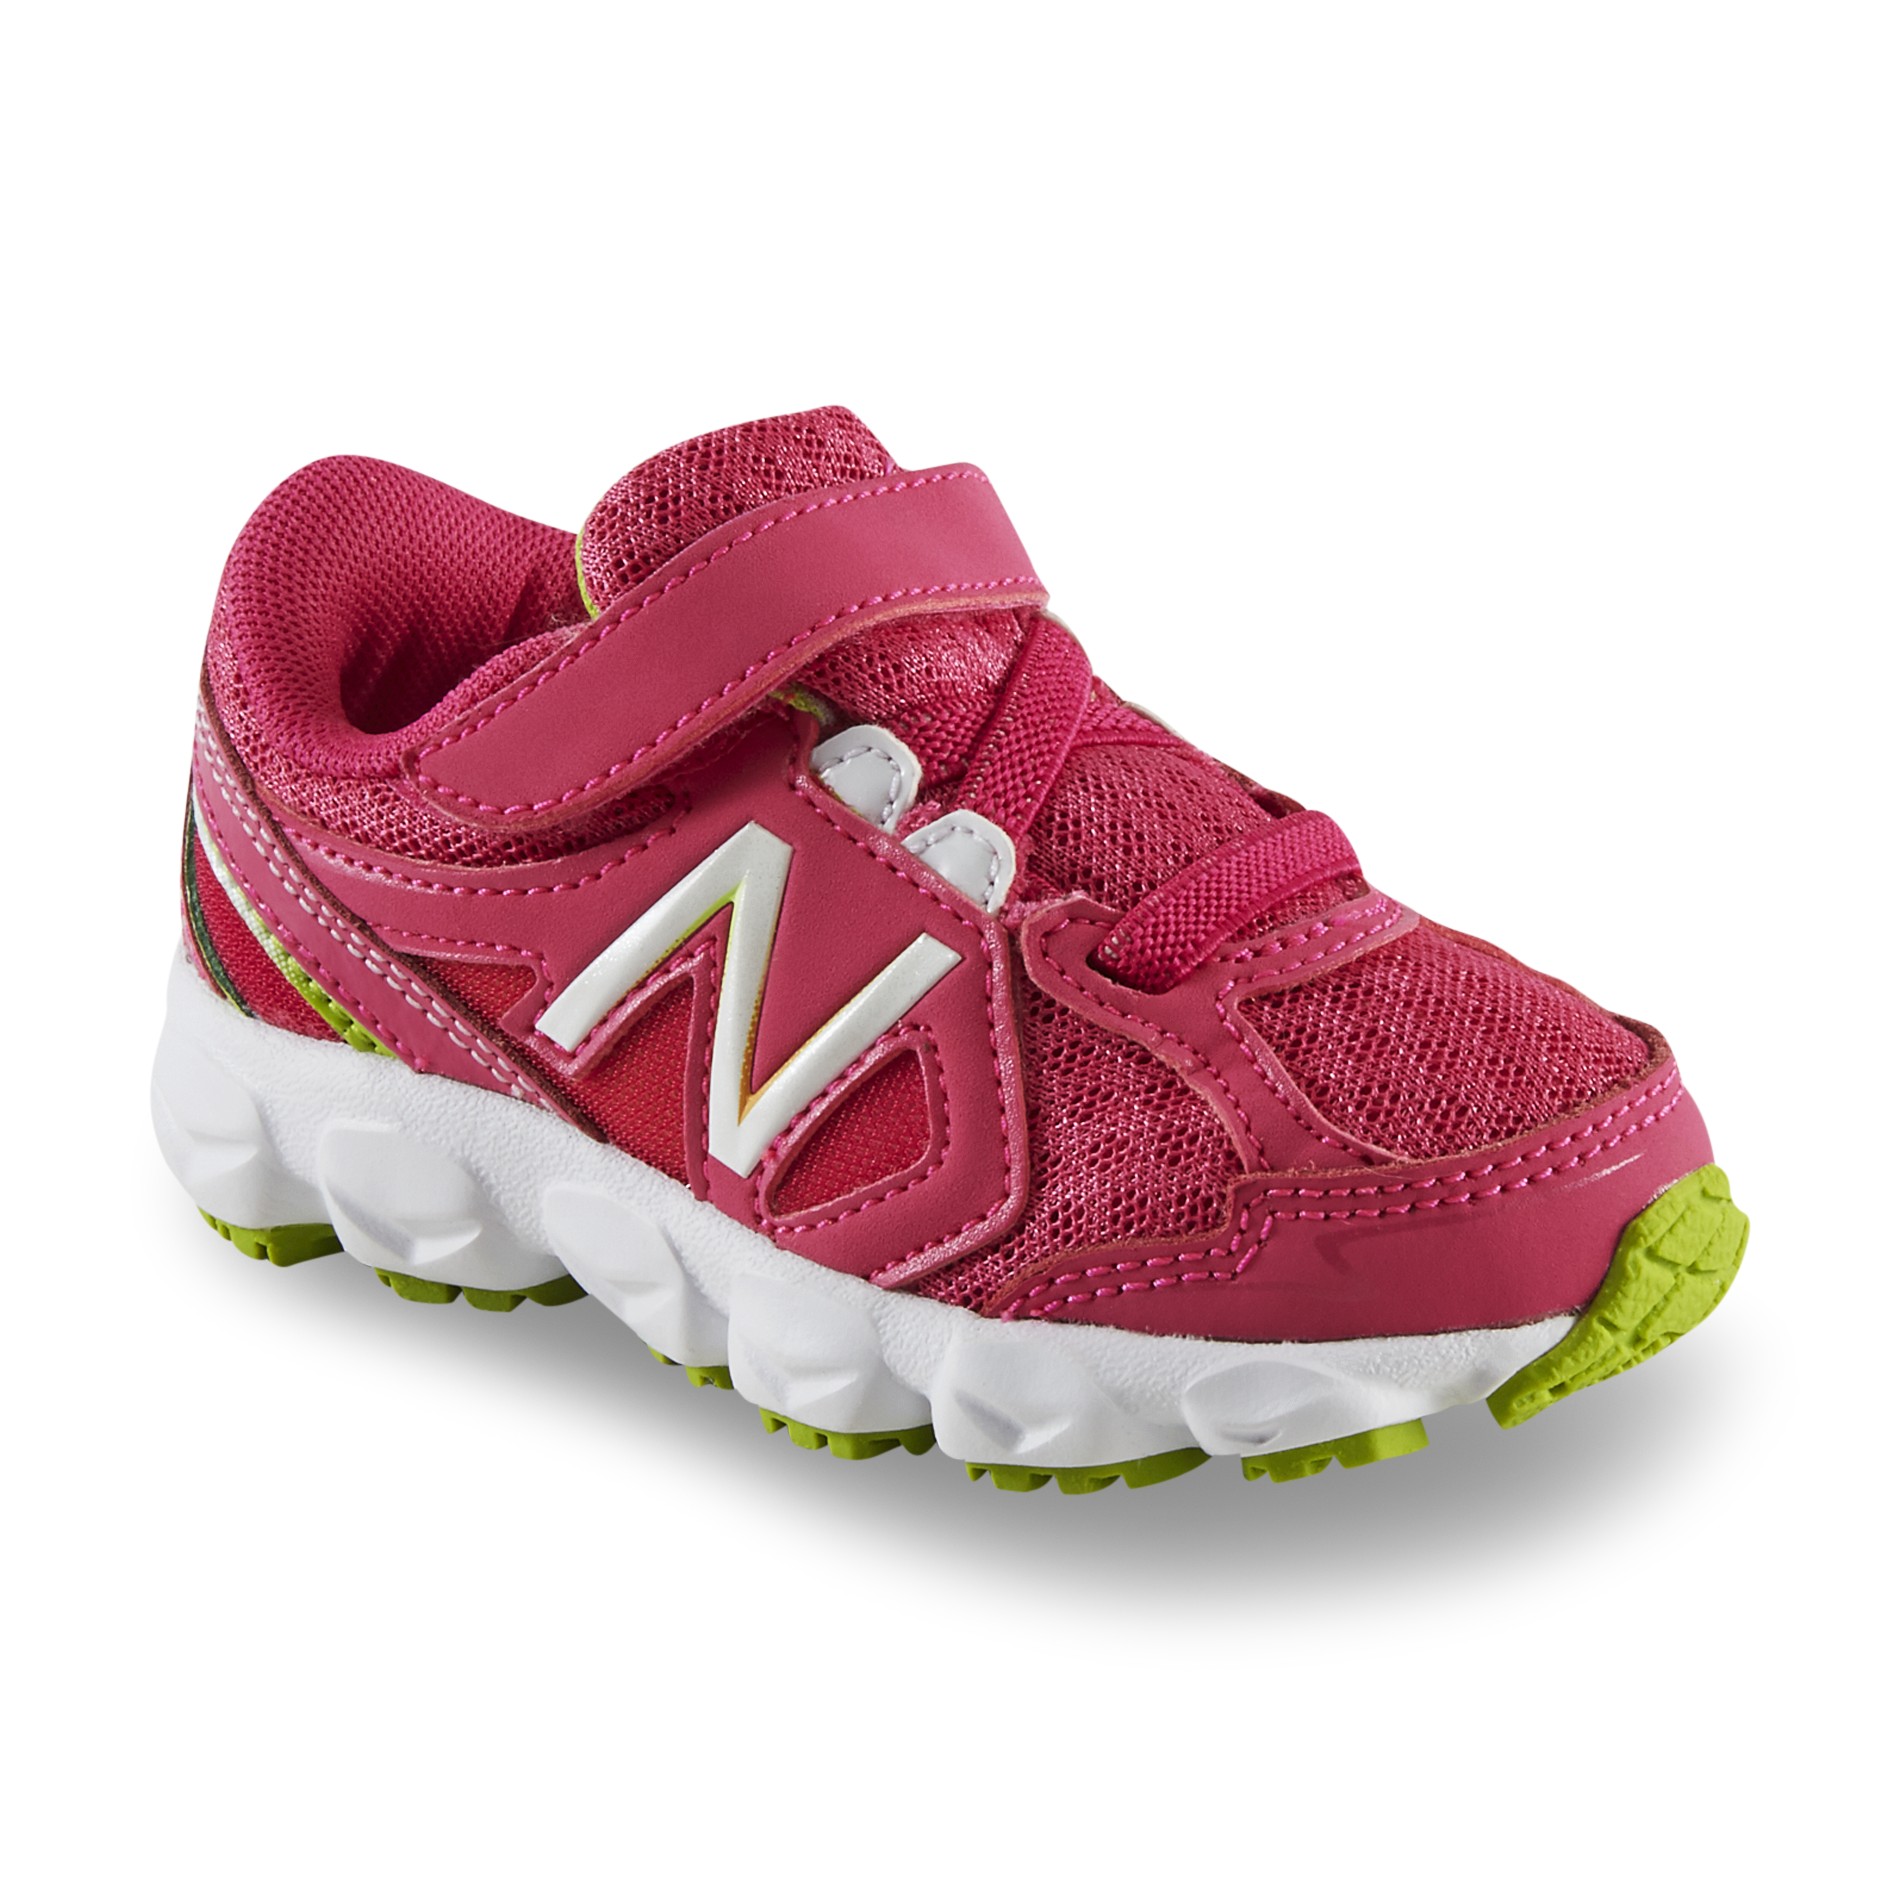 New Balance Toddler Girl's 750 Pink Athletic Shoe